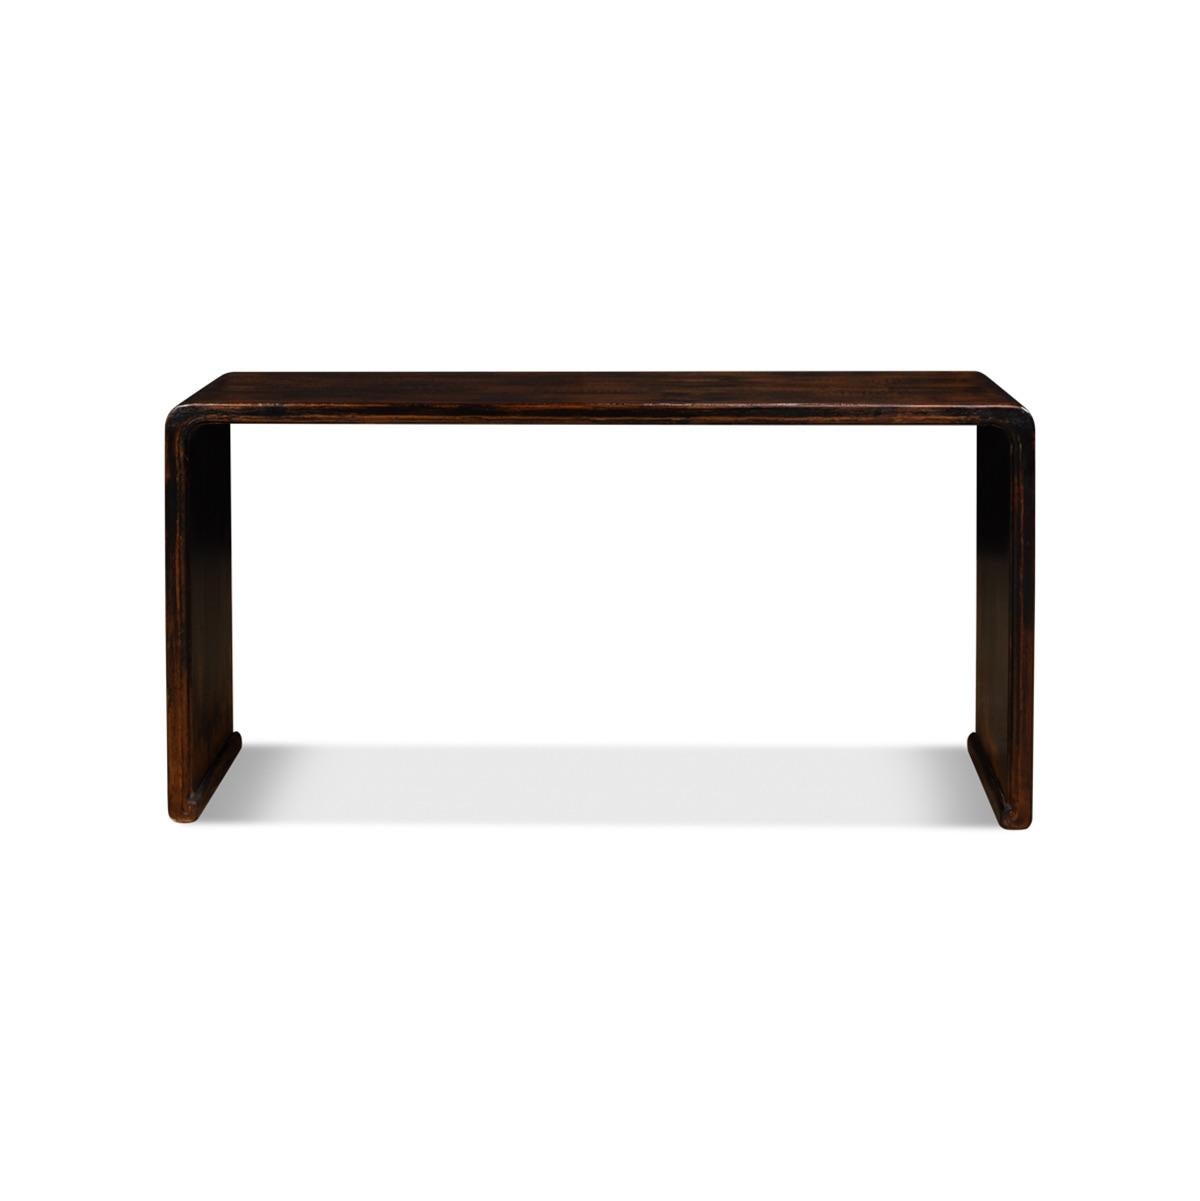 Chinese Export Altar Table, old pine in an antiqued stain. This influential design has been popular throughout centuries. Simple lines and a wonderful finish make this altar table ideal in a traditional or modern setting.

Dimensions: 63